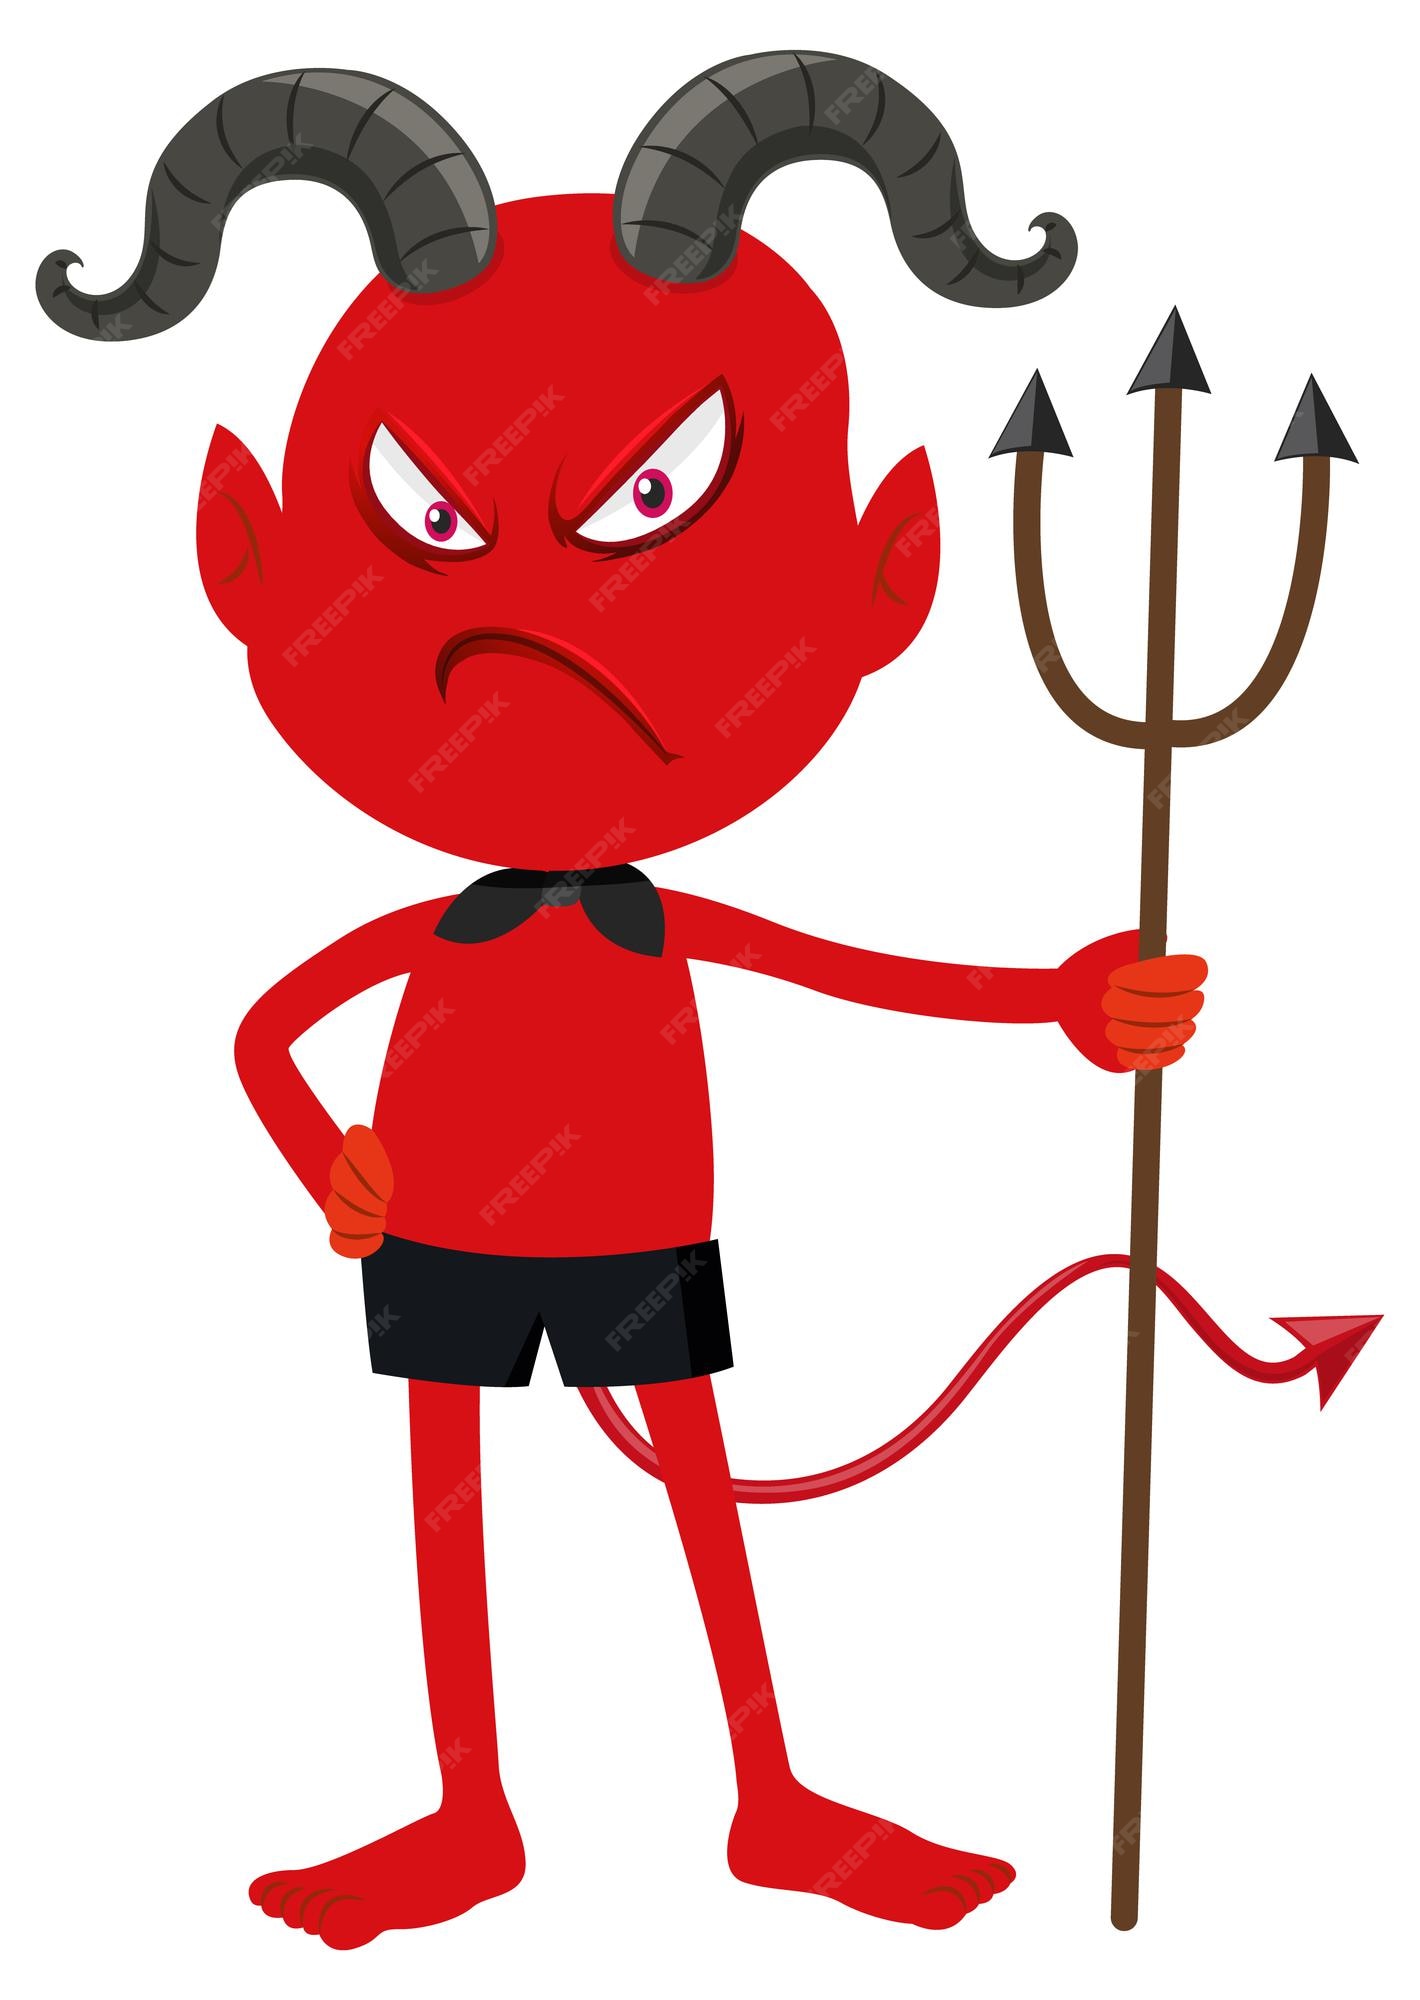 Free Vector | A red devil cartoon character with facial expression